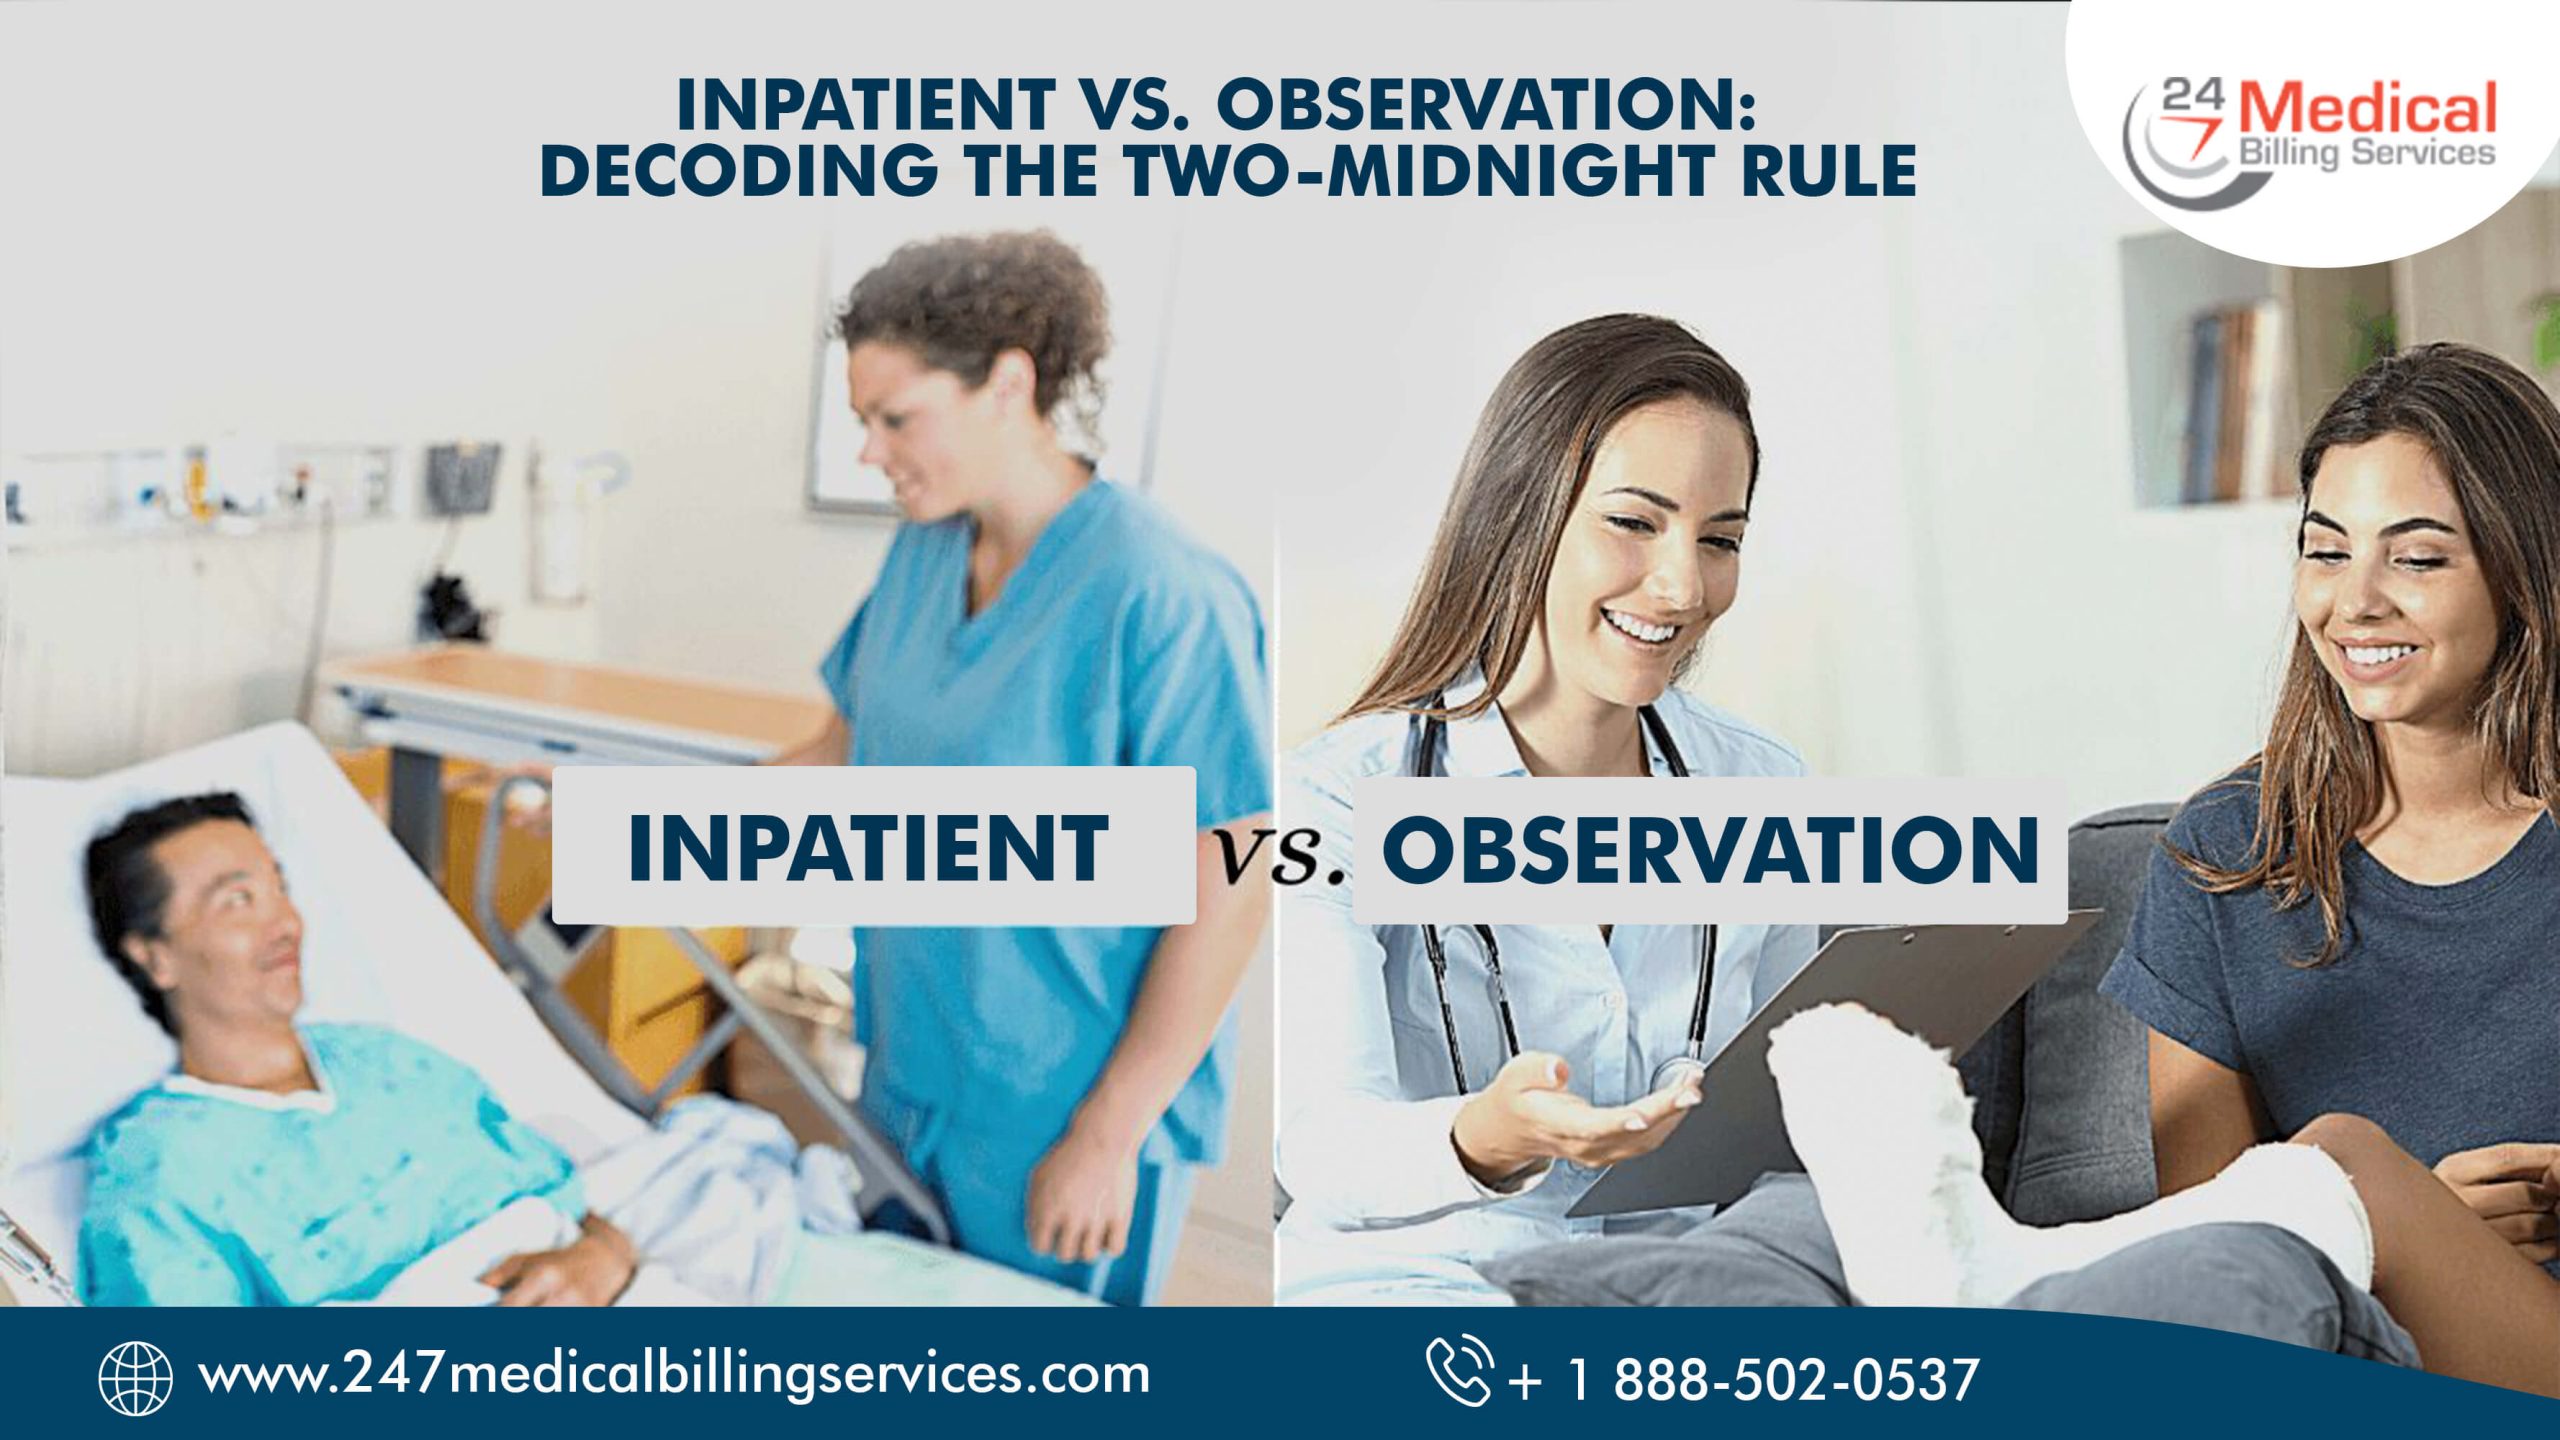  Inpatient vs. Observation: Decoding the Two-Midnight Rule